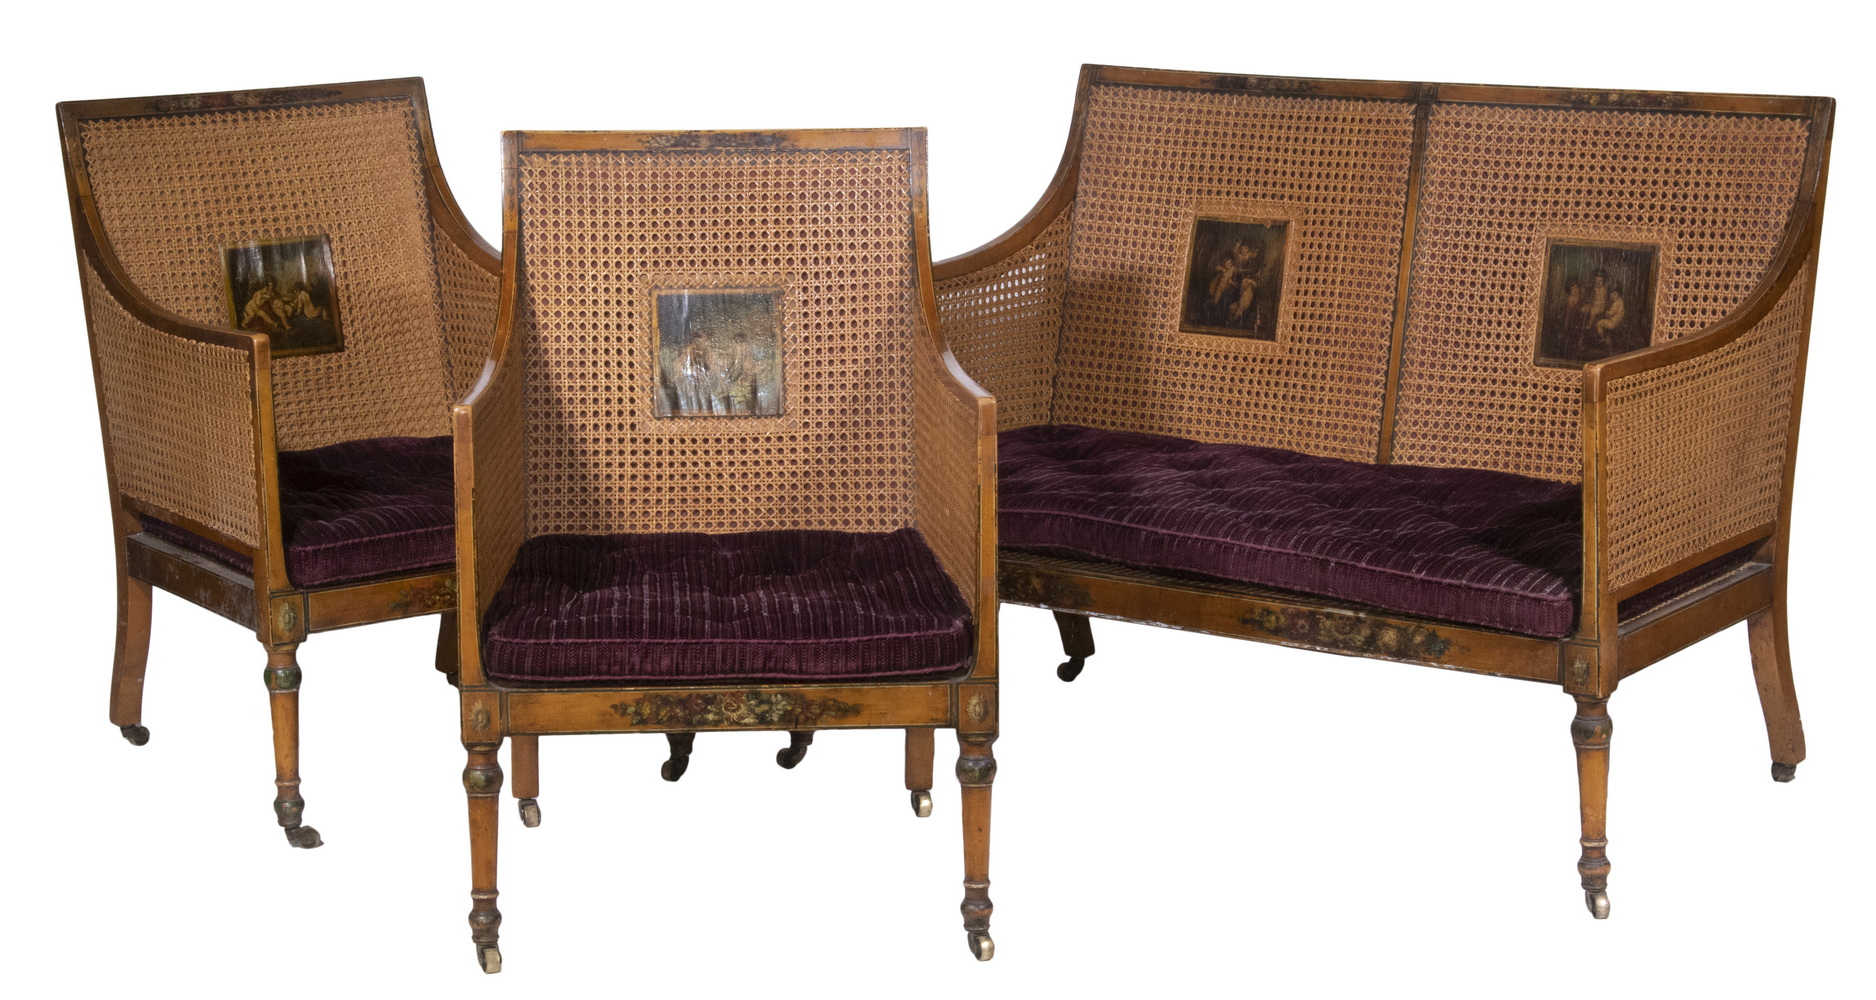 ADAMS STYLE CANE CHAIRS SETTEE 302c04